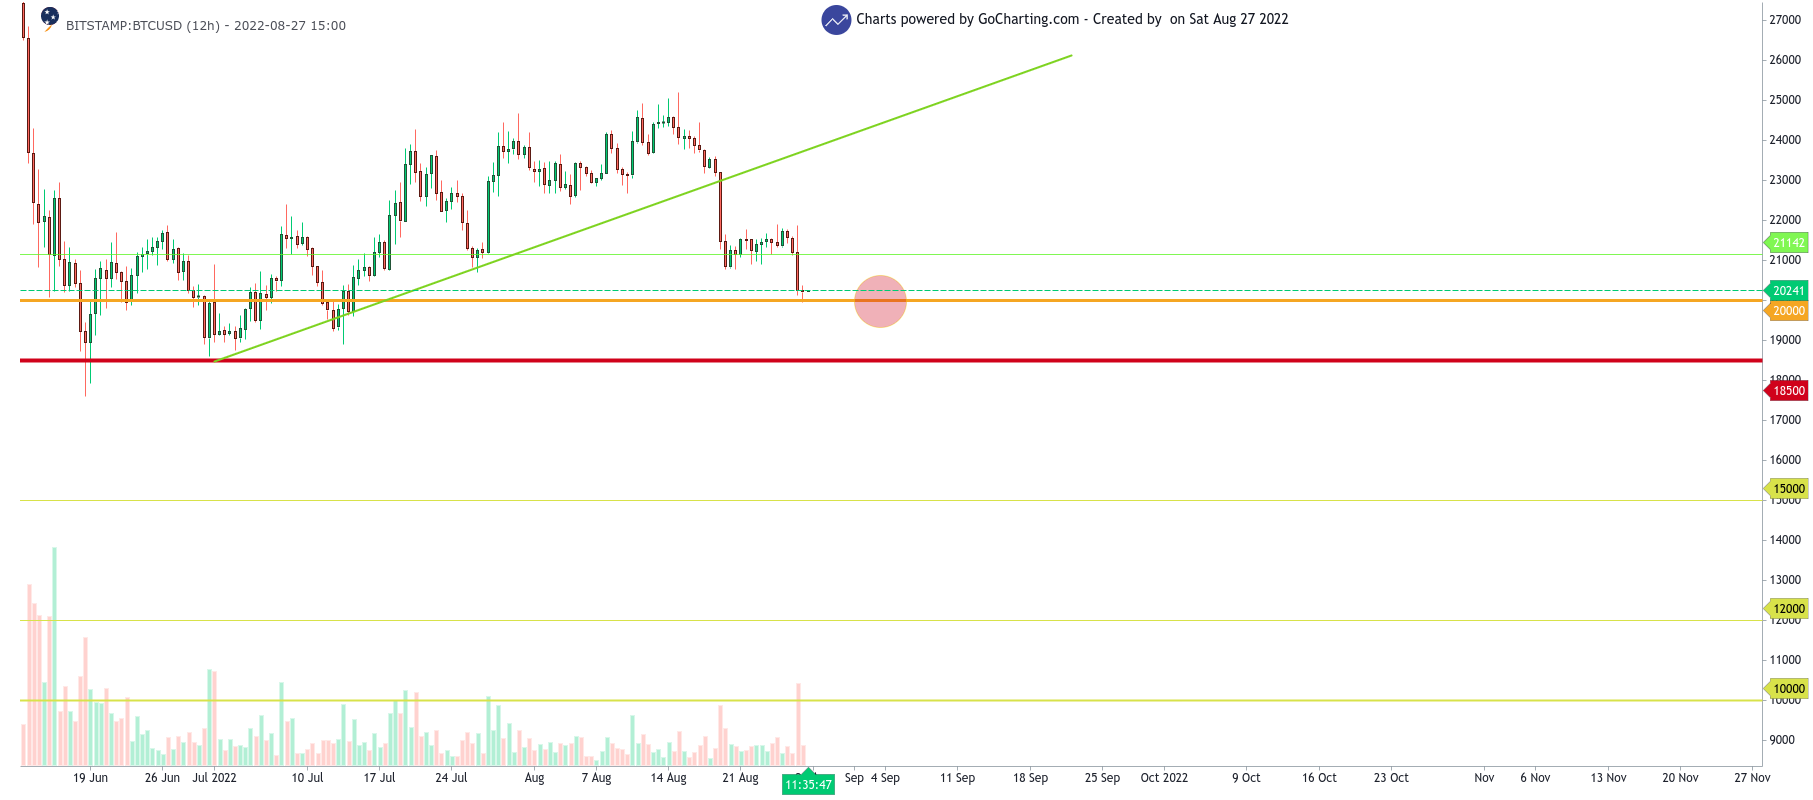 BTC/USD 12-hours chart showing the low targets of BTC